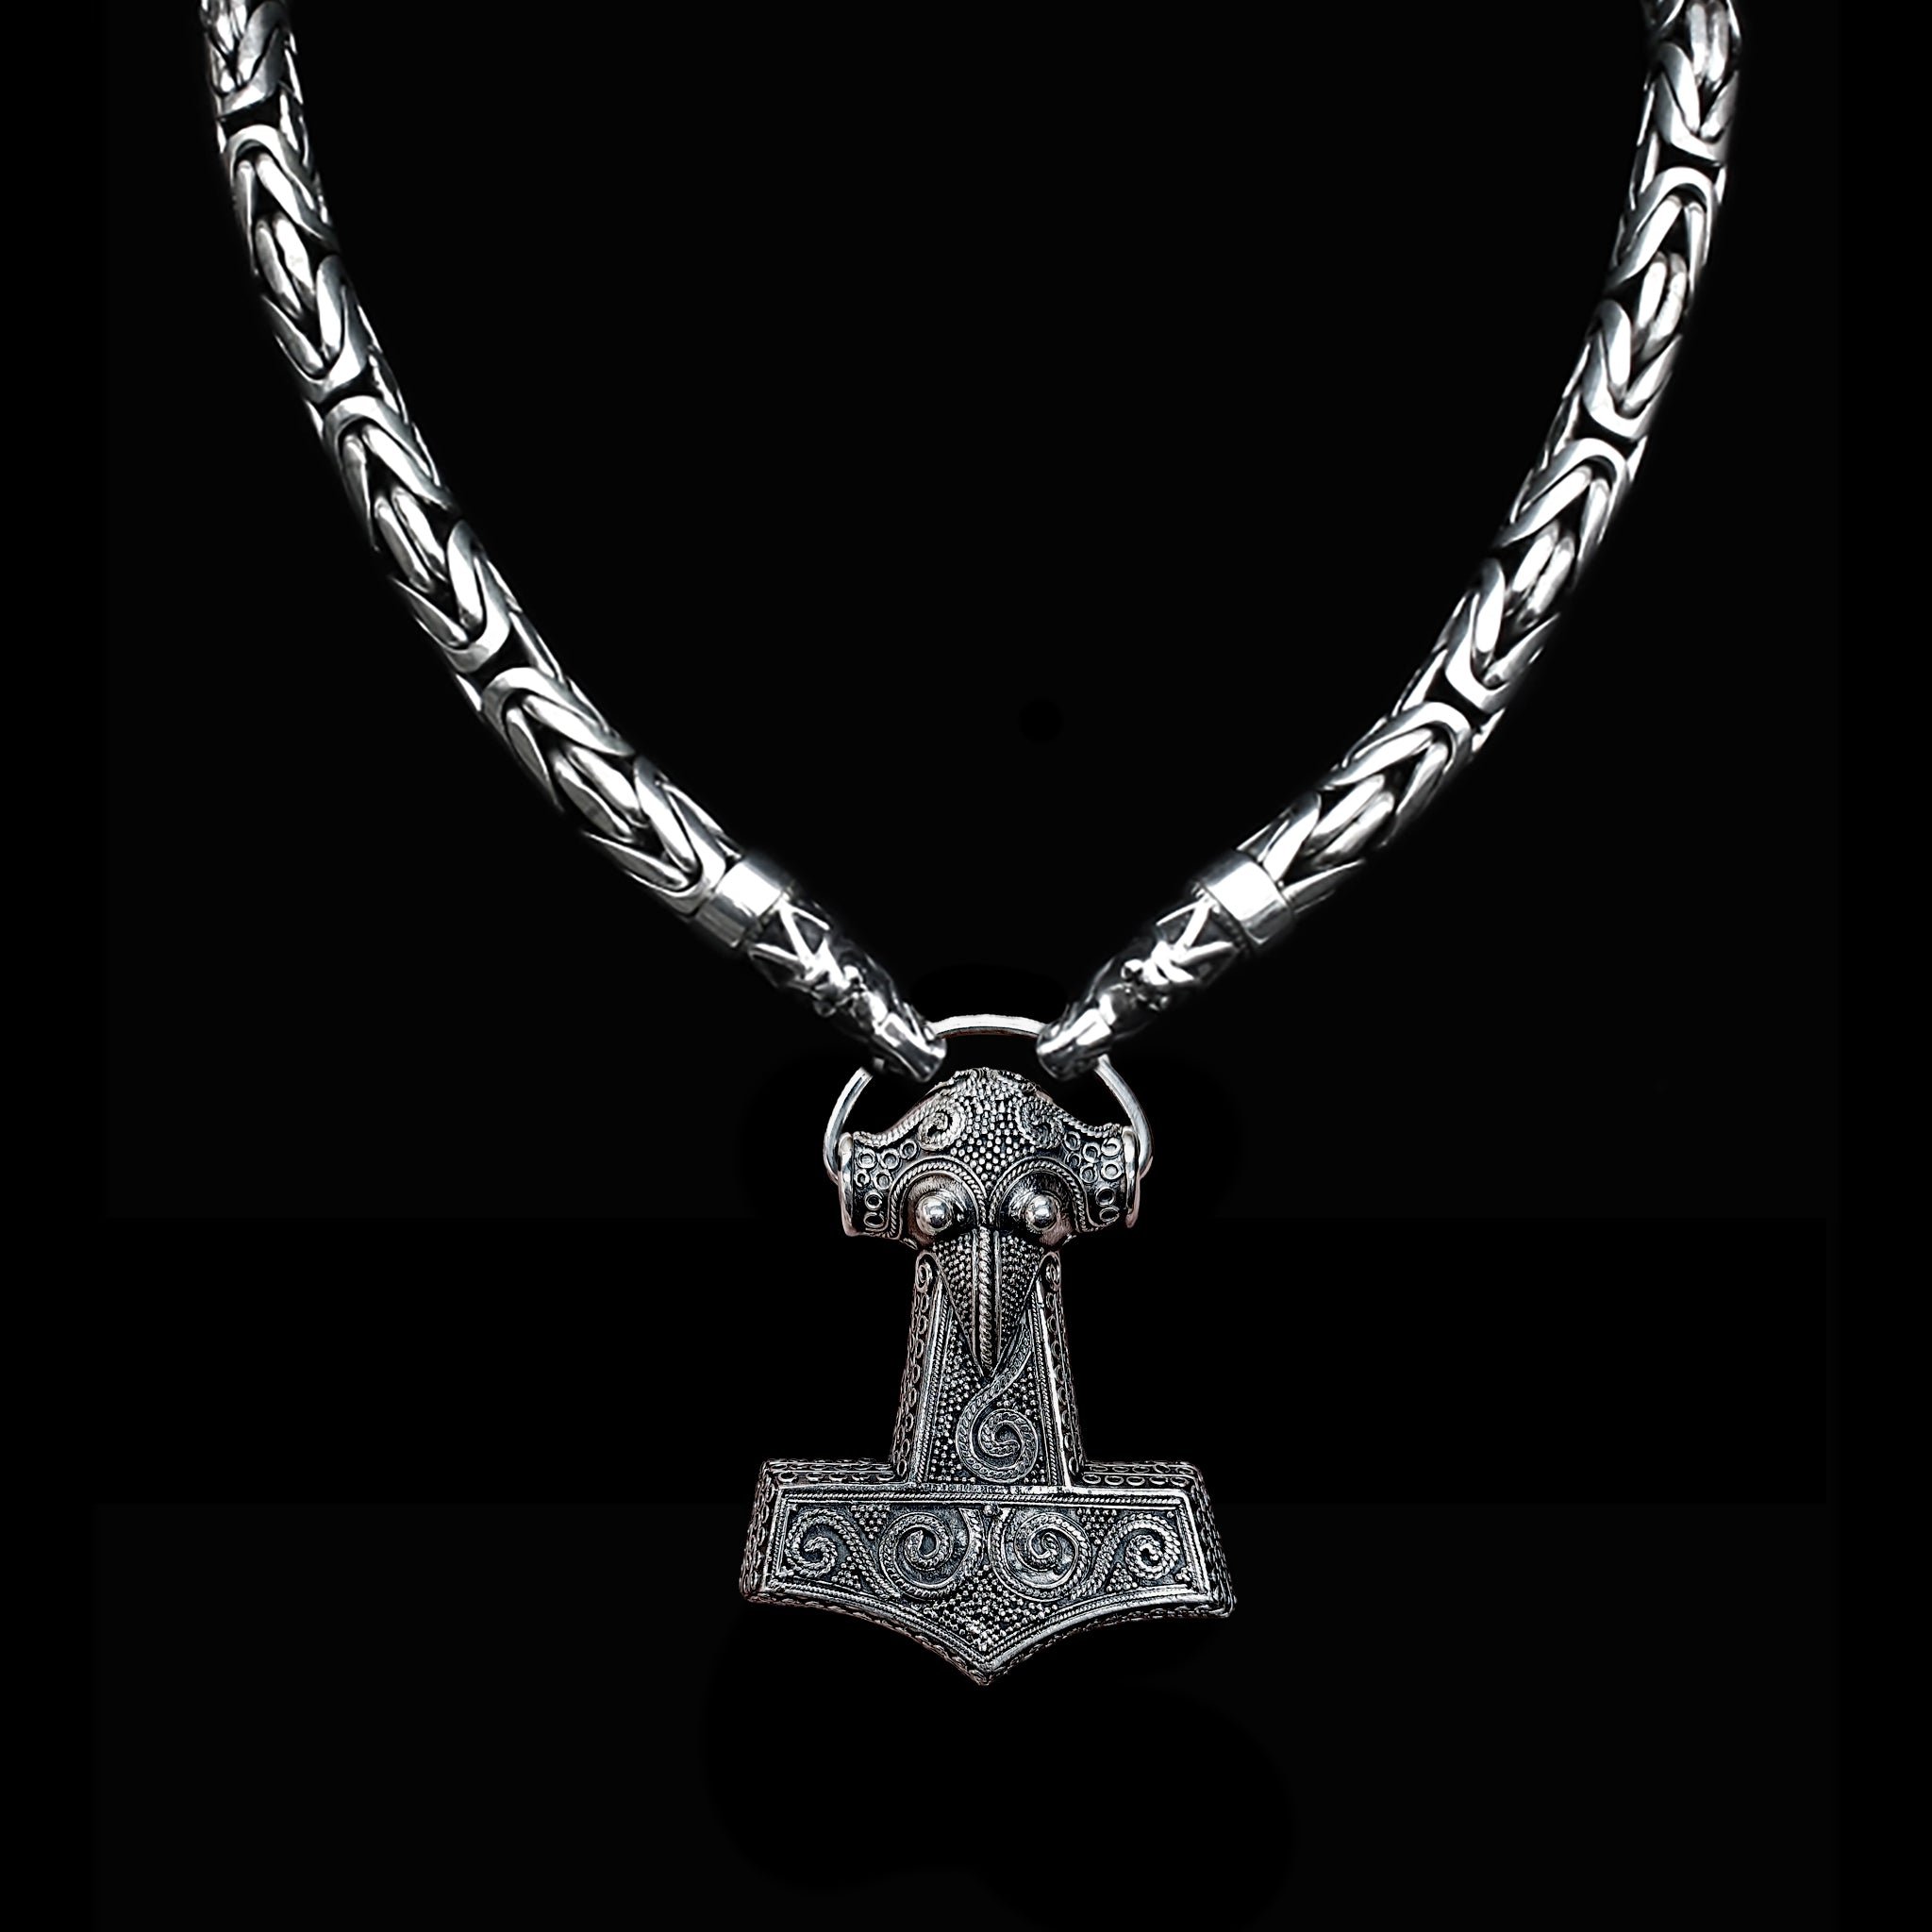 10mm Silver King Chain Necklace with Gotland Dragon Heads